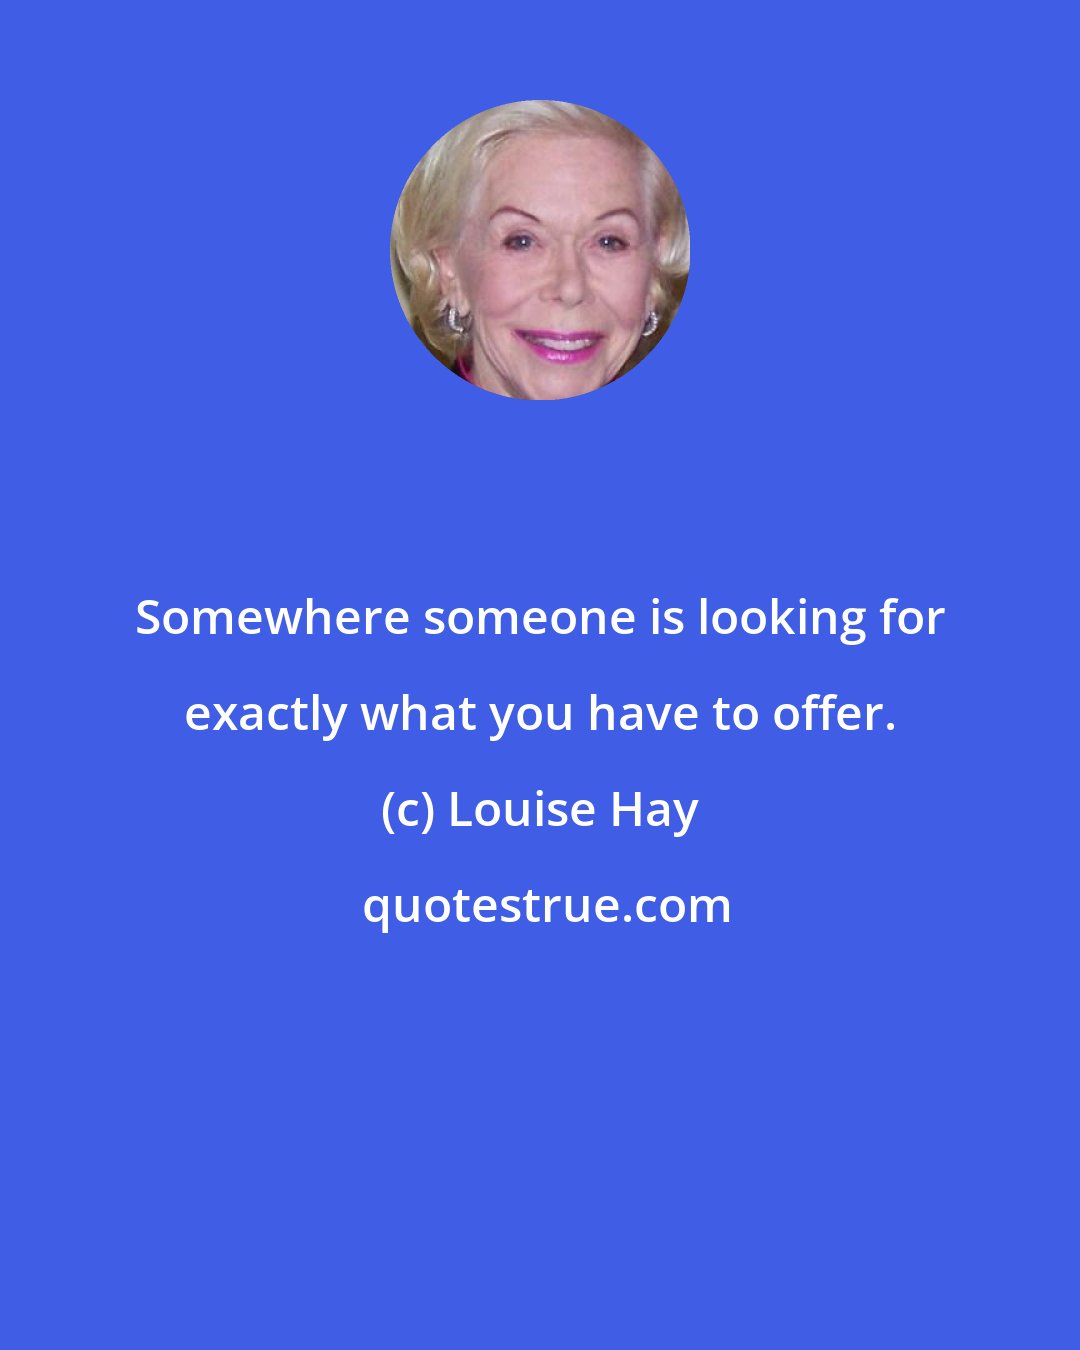 Louise Hay: Somewhere someone is looking for exactly what you have to offer.